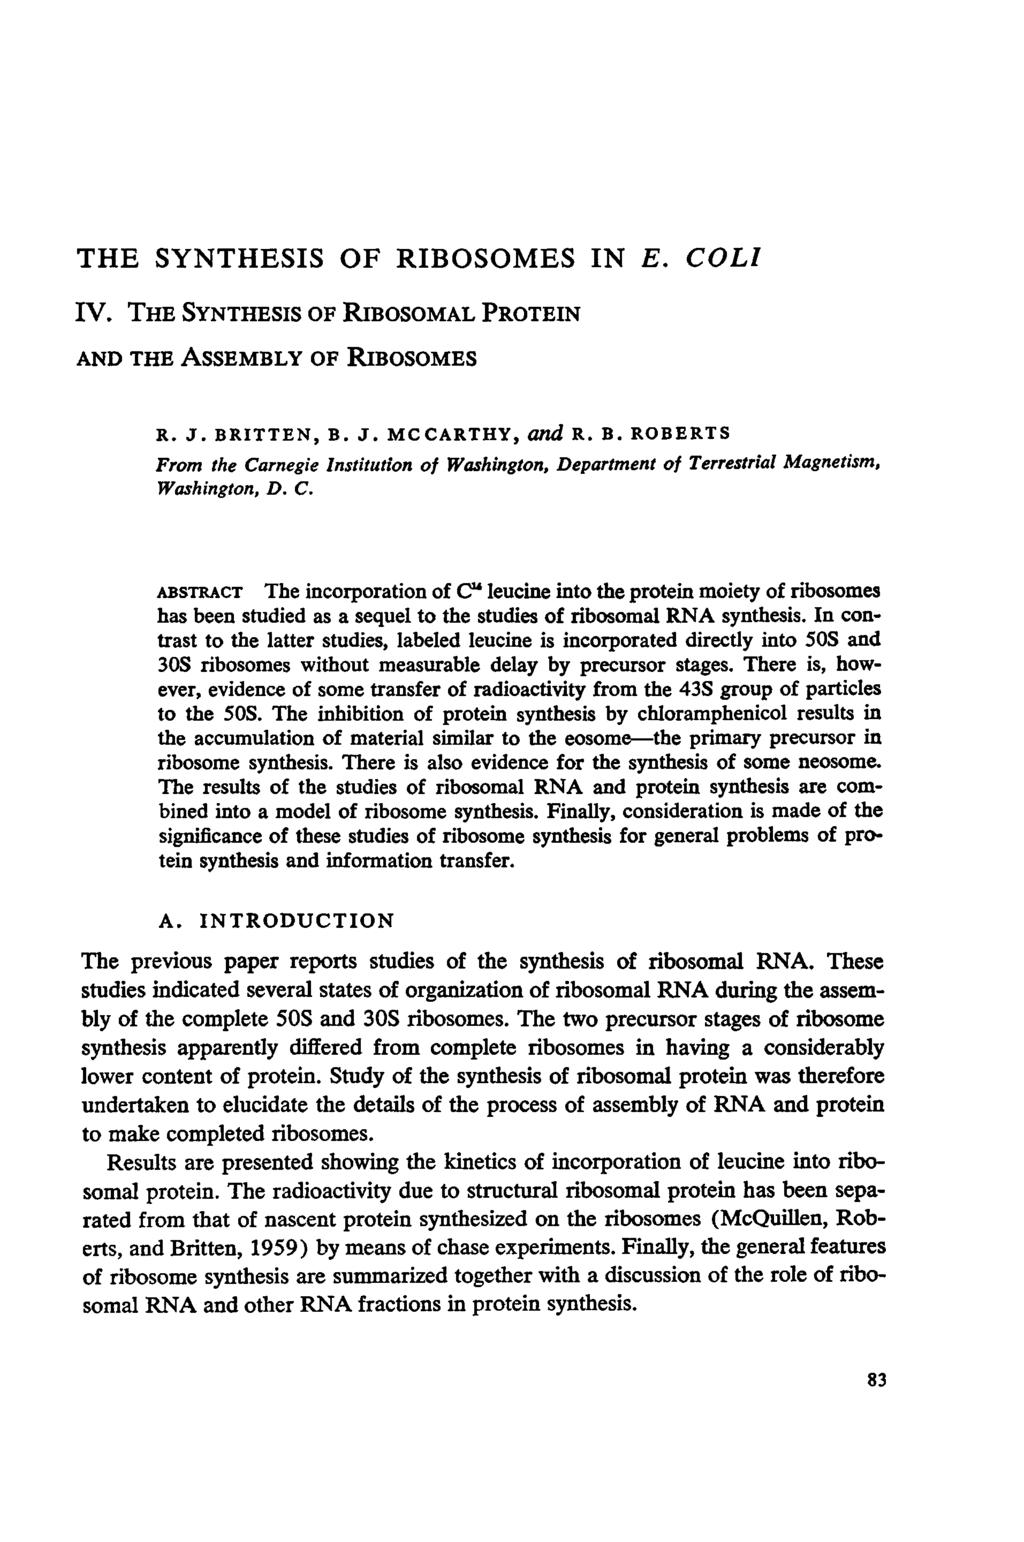 THE SYNTHESIS OF RIBOSOMES IN E. IV. THE SYNTHESIS OF RIBOSOMAL PROTEIN AND THE ASSEMBLY OF RIBOSOMES COLI R. J. BR